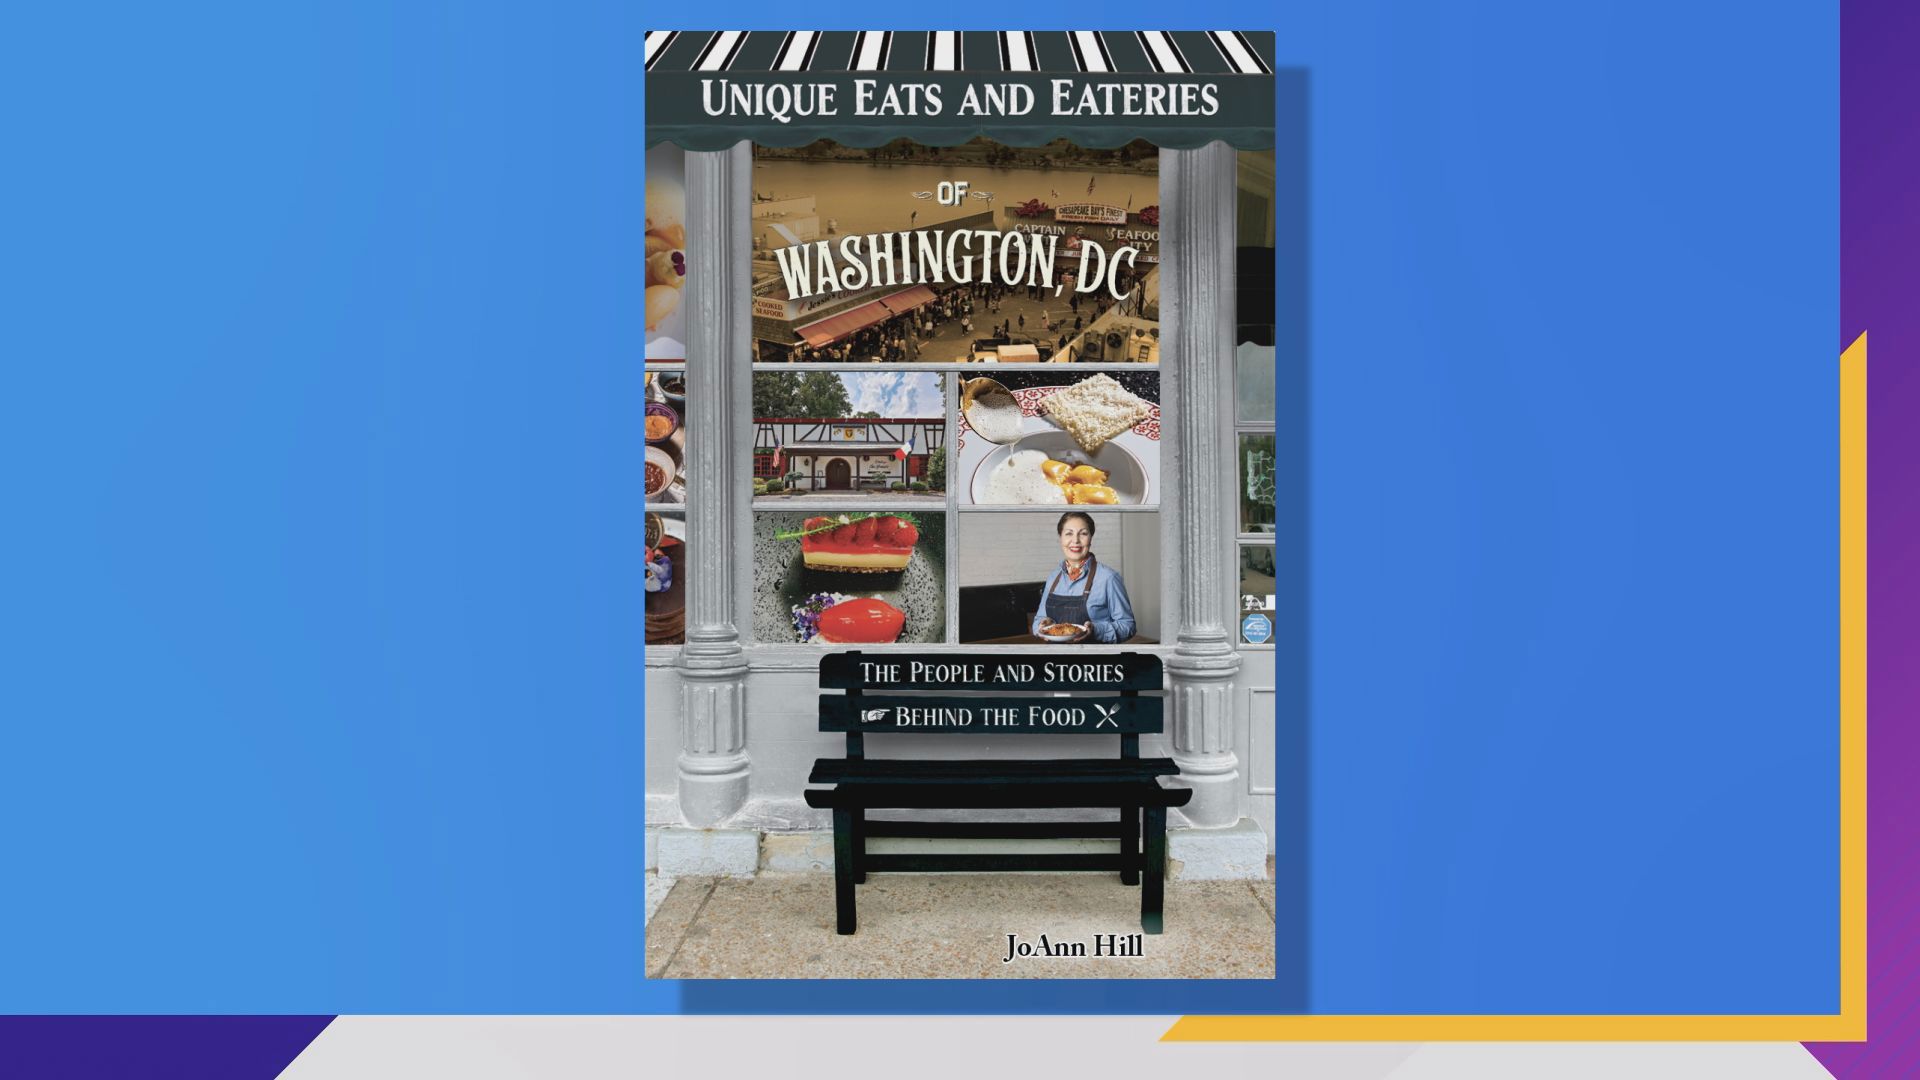 Author Joann Hill shares her new book with us, 'Unique Eats and Eateries of Washington, DC'. The book gives a great look at the hidden gems of Washington, DC.